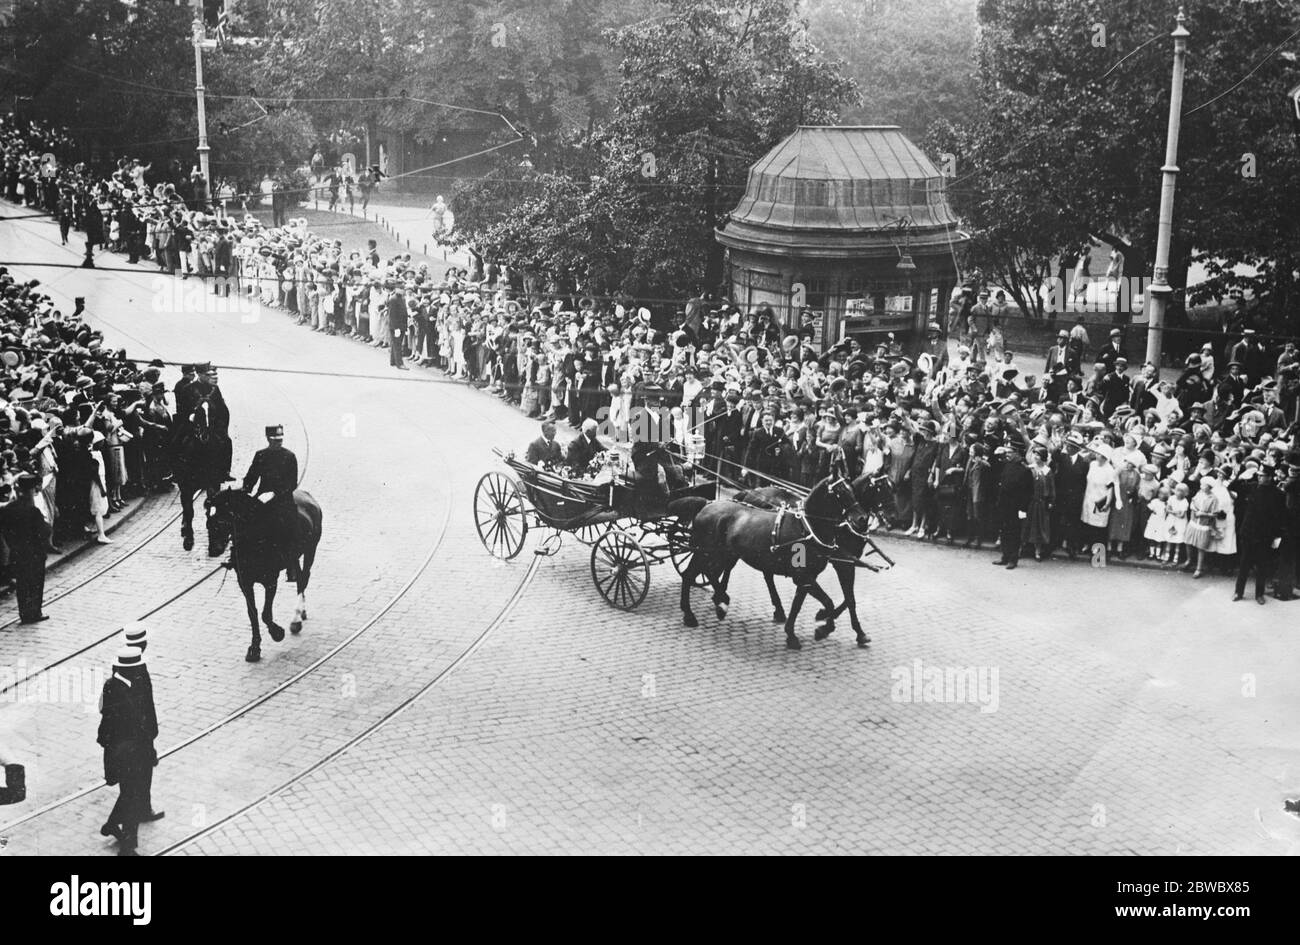 Roald Amundsen ' s arrival in Oslo Roald Amundsen and Lincoln Ellsworth drive to the Royal palace 7 July 1925 Stock Photo